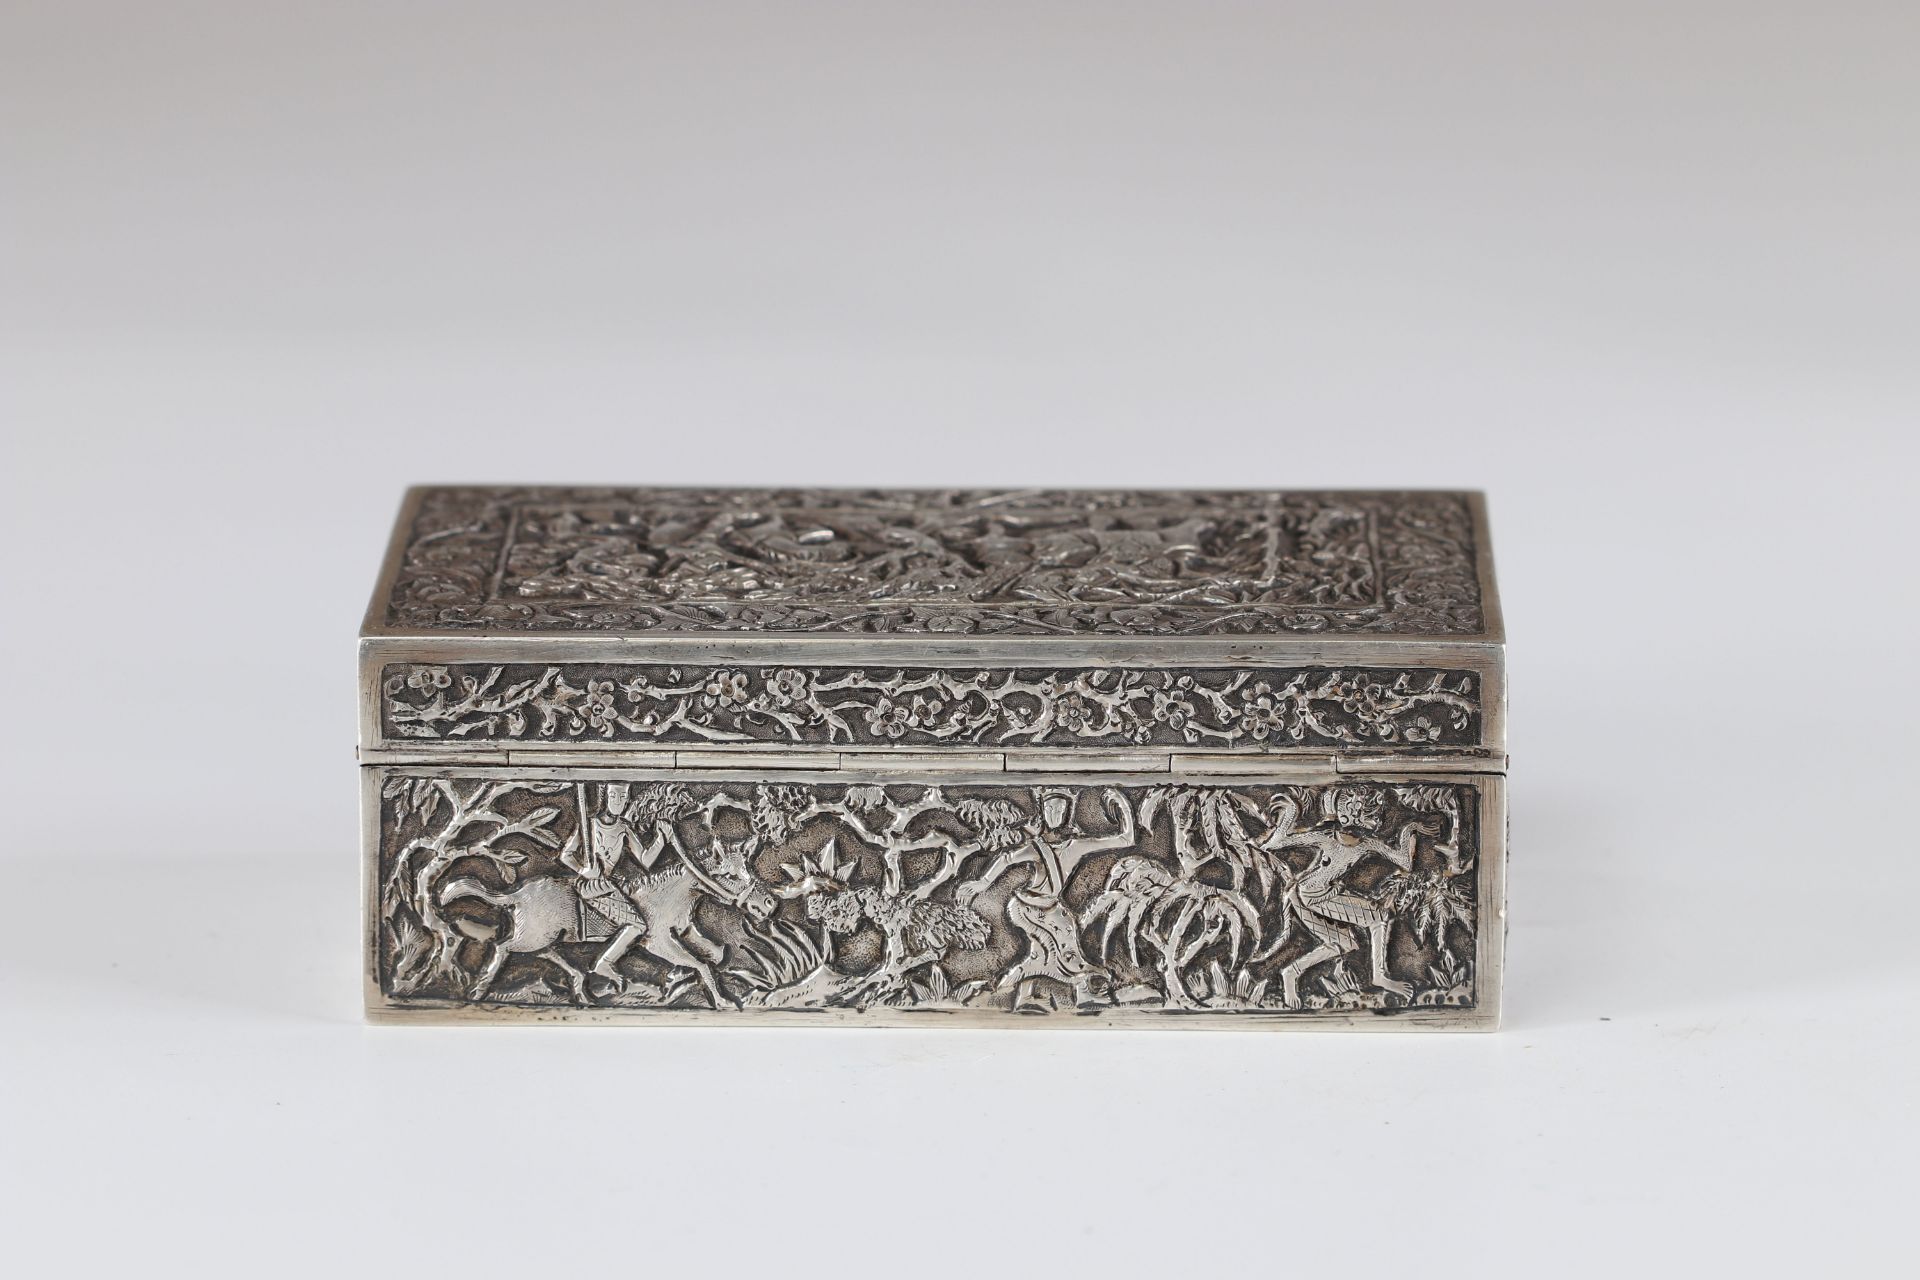 North China Thailand rich silver box decor of scenes of life early 20th century - Image 4 of 5